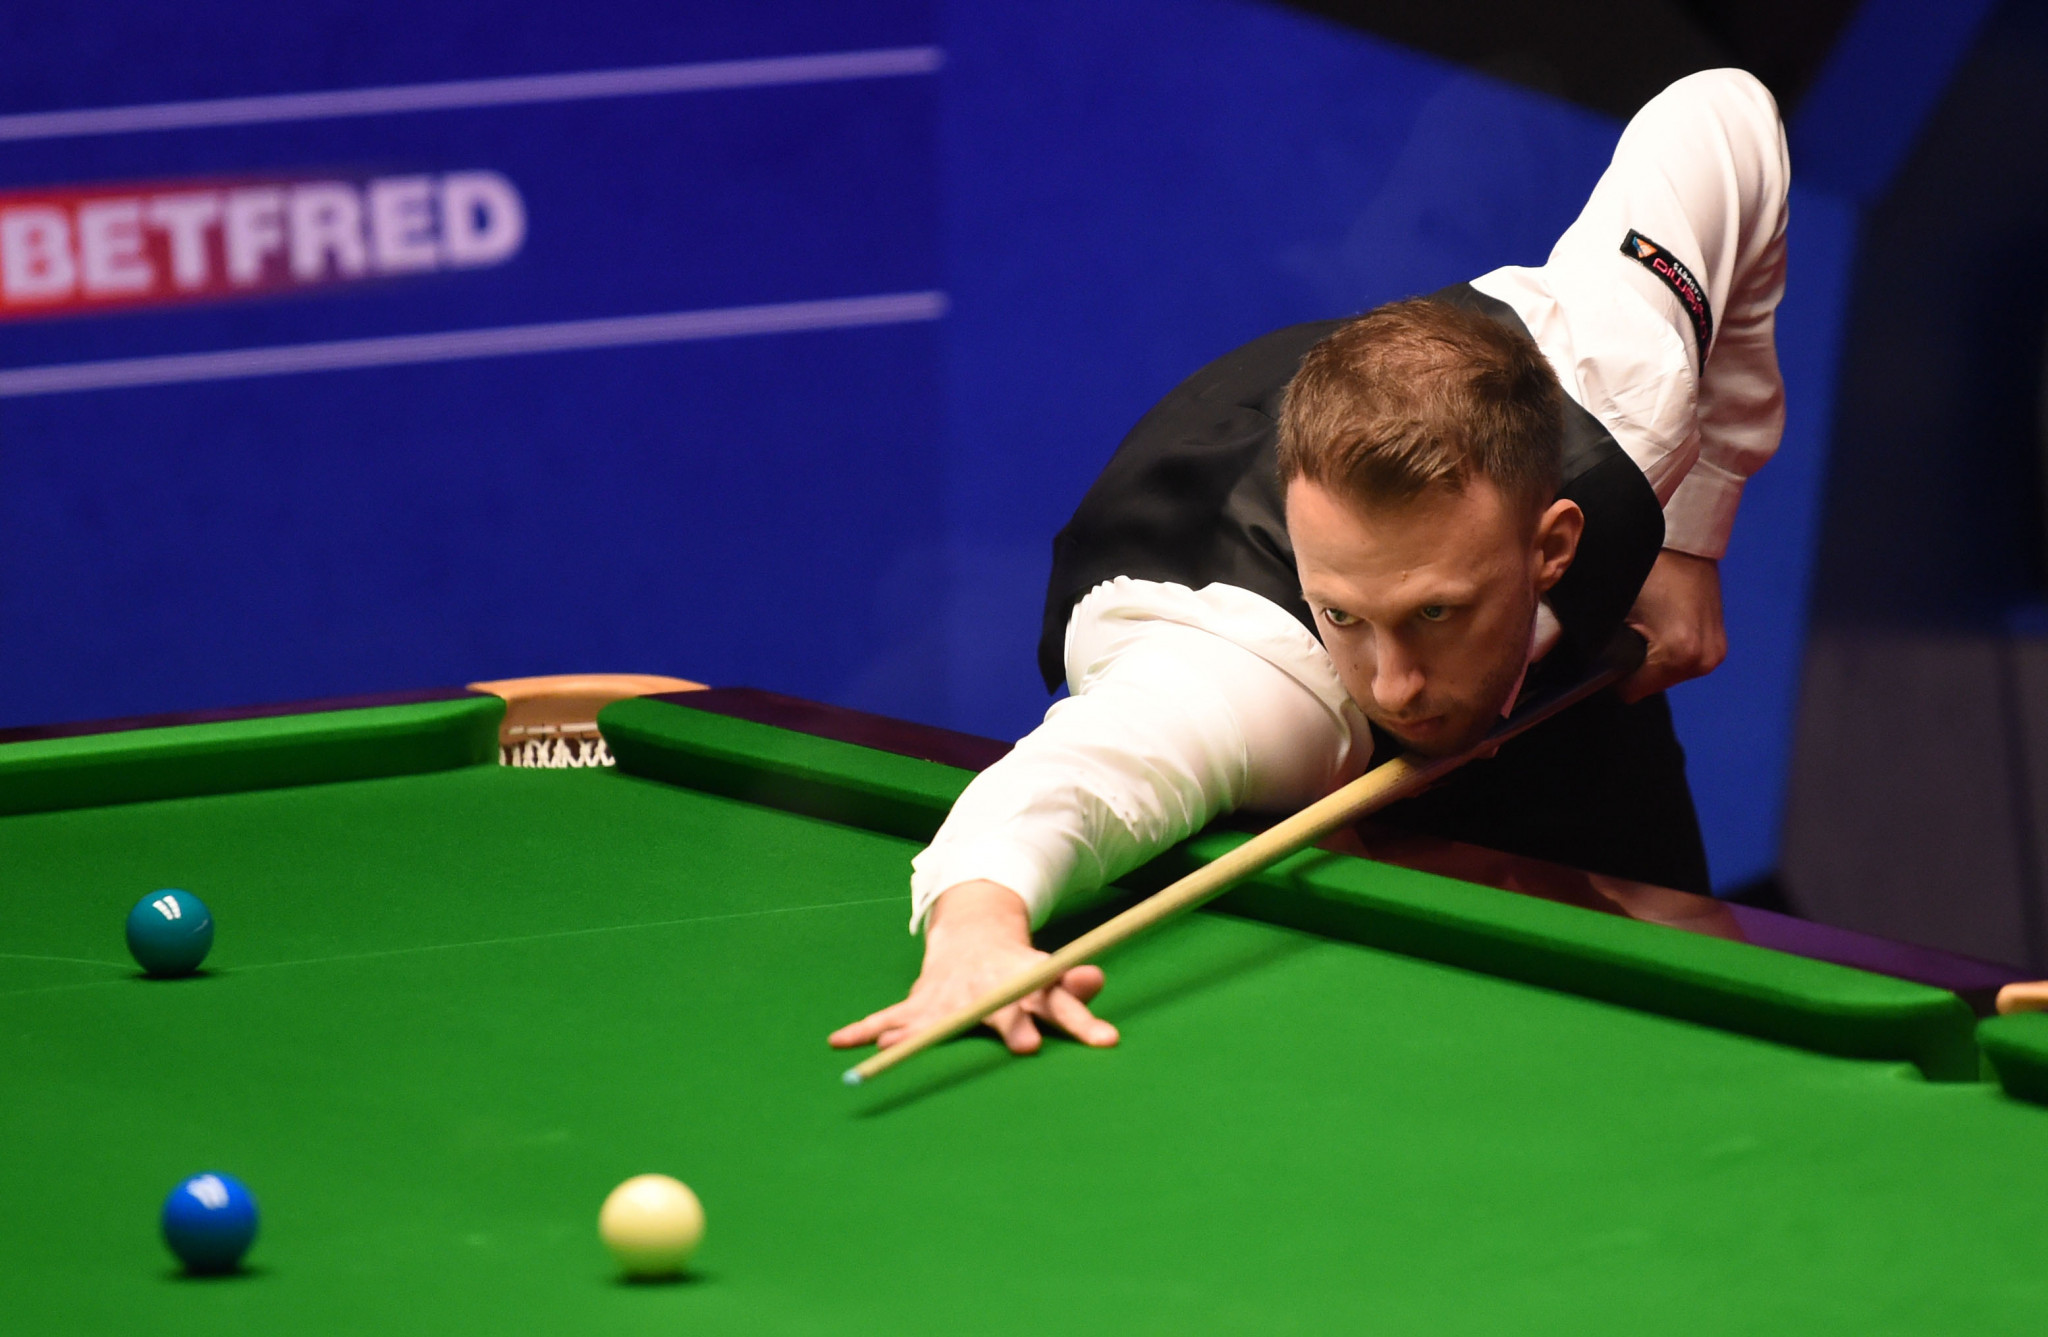 Top seed and defending champion Judd Trump secured a hard-fought 13-11 win over Yan Bingtao at the World Snooker Championship ©Getty Images